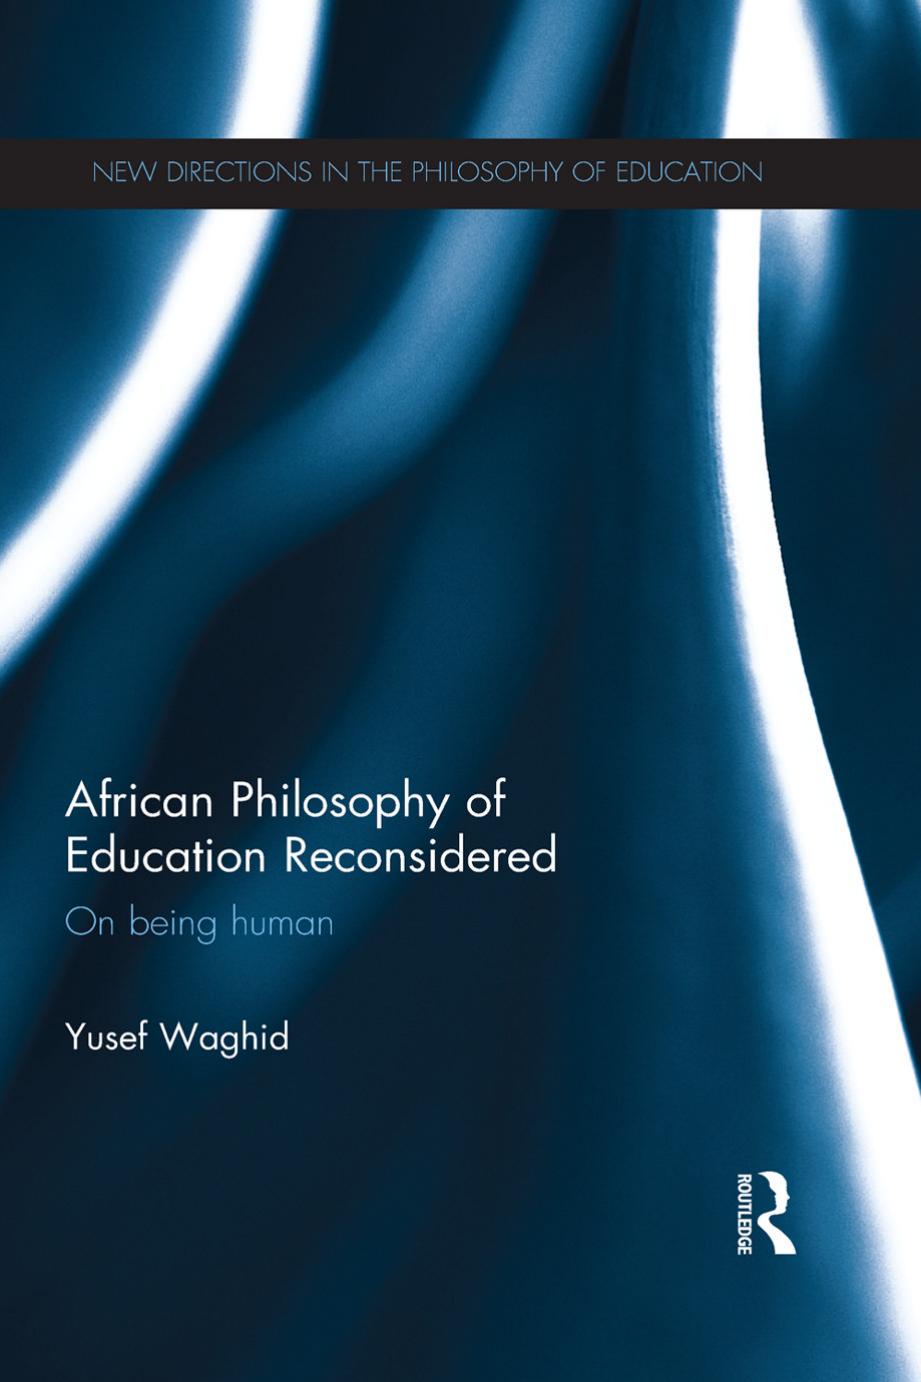 African Philosophy of Education Reconsidered: On Being Human